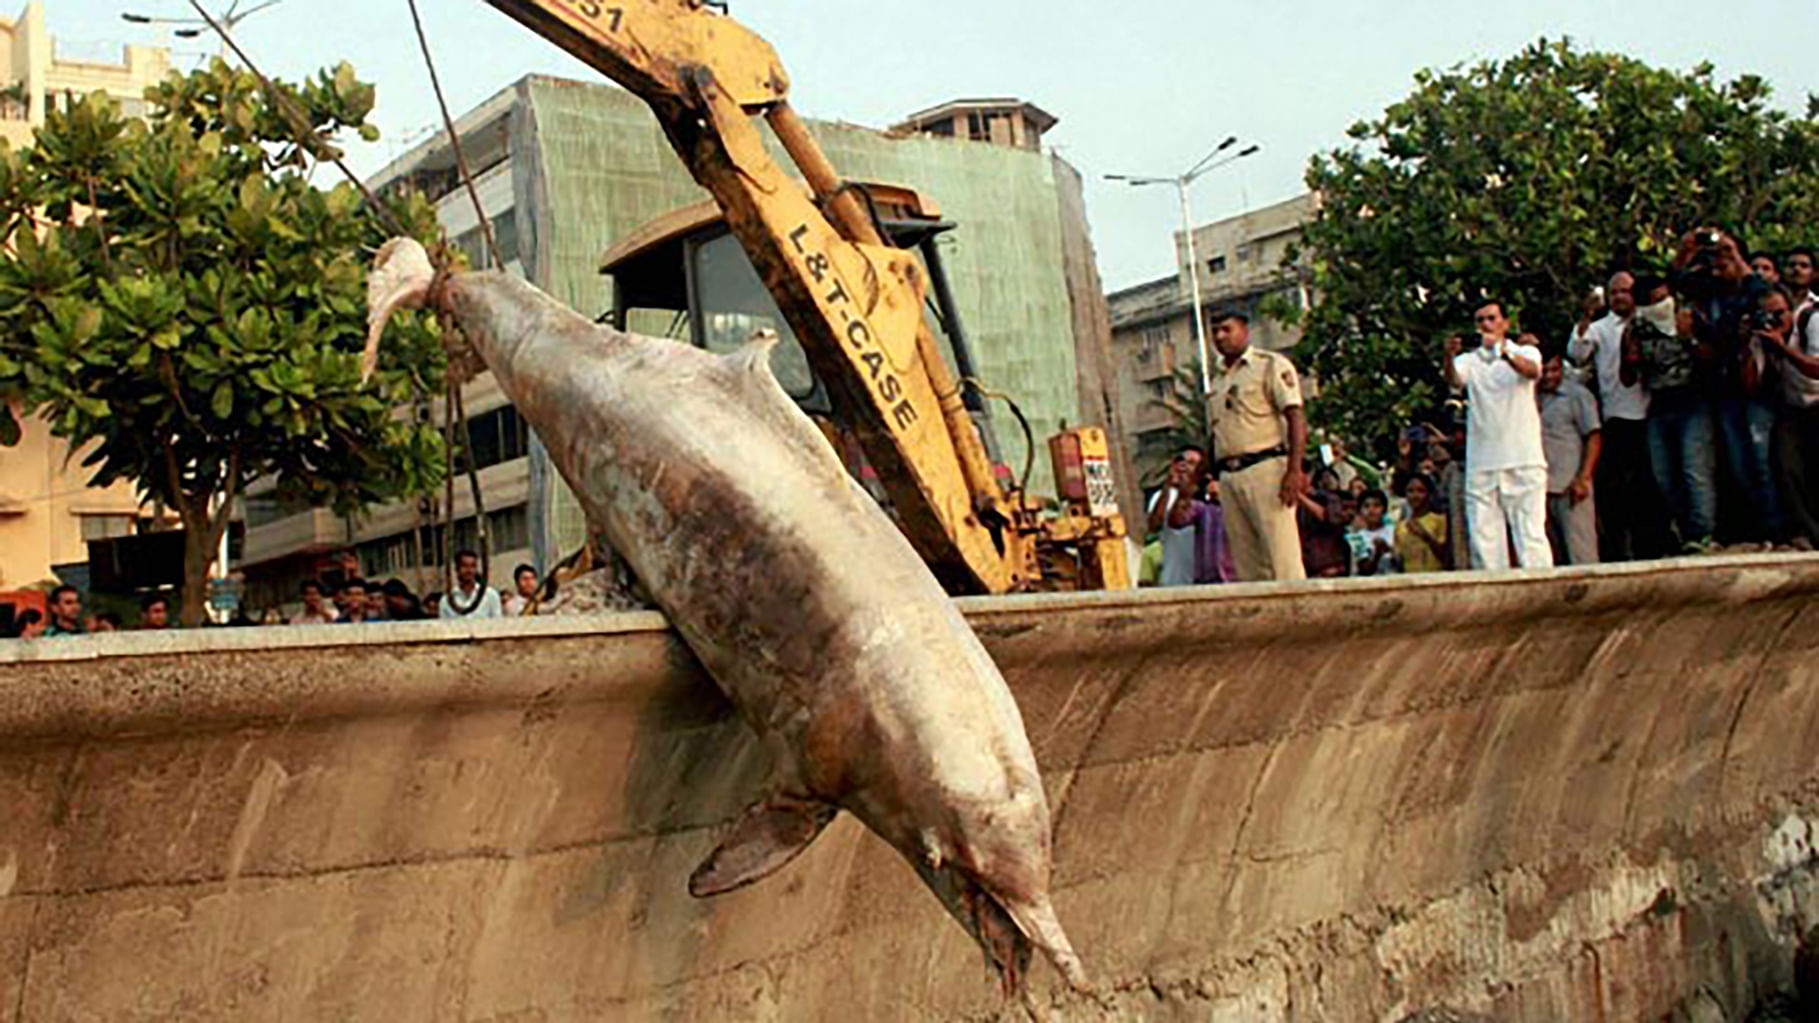 A 10 ft dead dolphin that was found near Marine Drive in
Mumbai in April last year. (Photo: PTI)